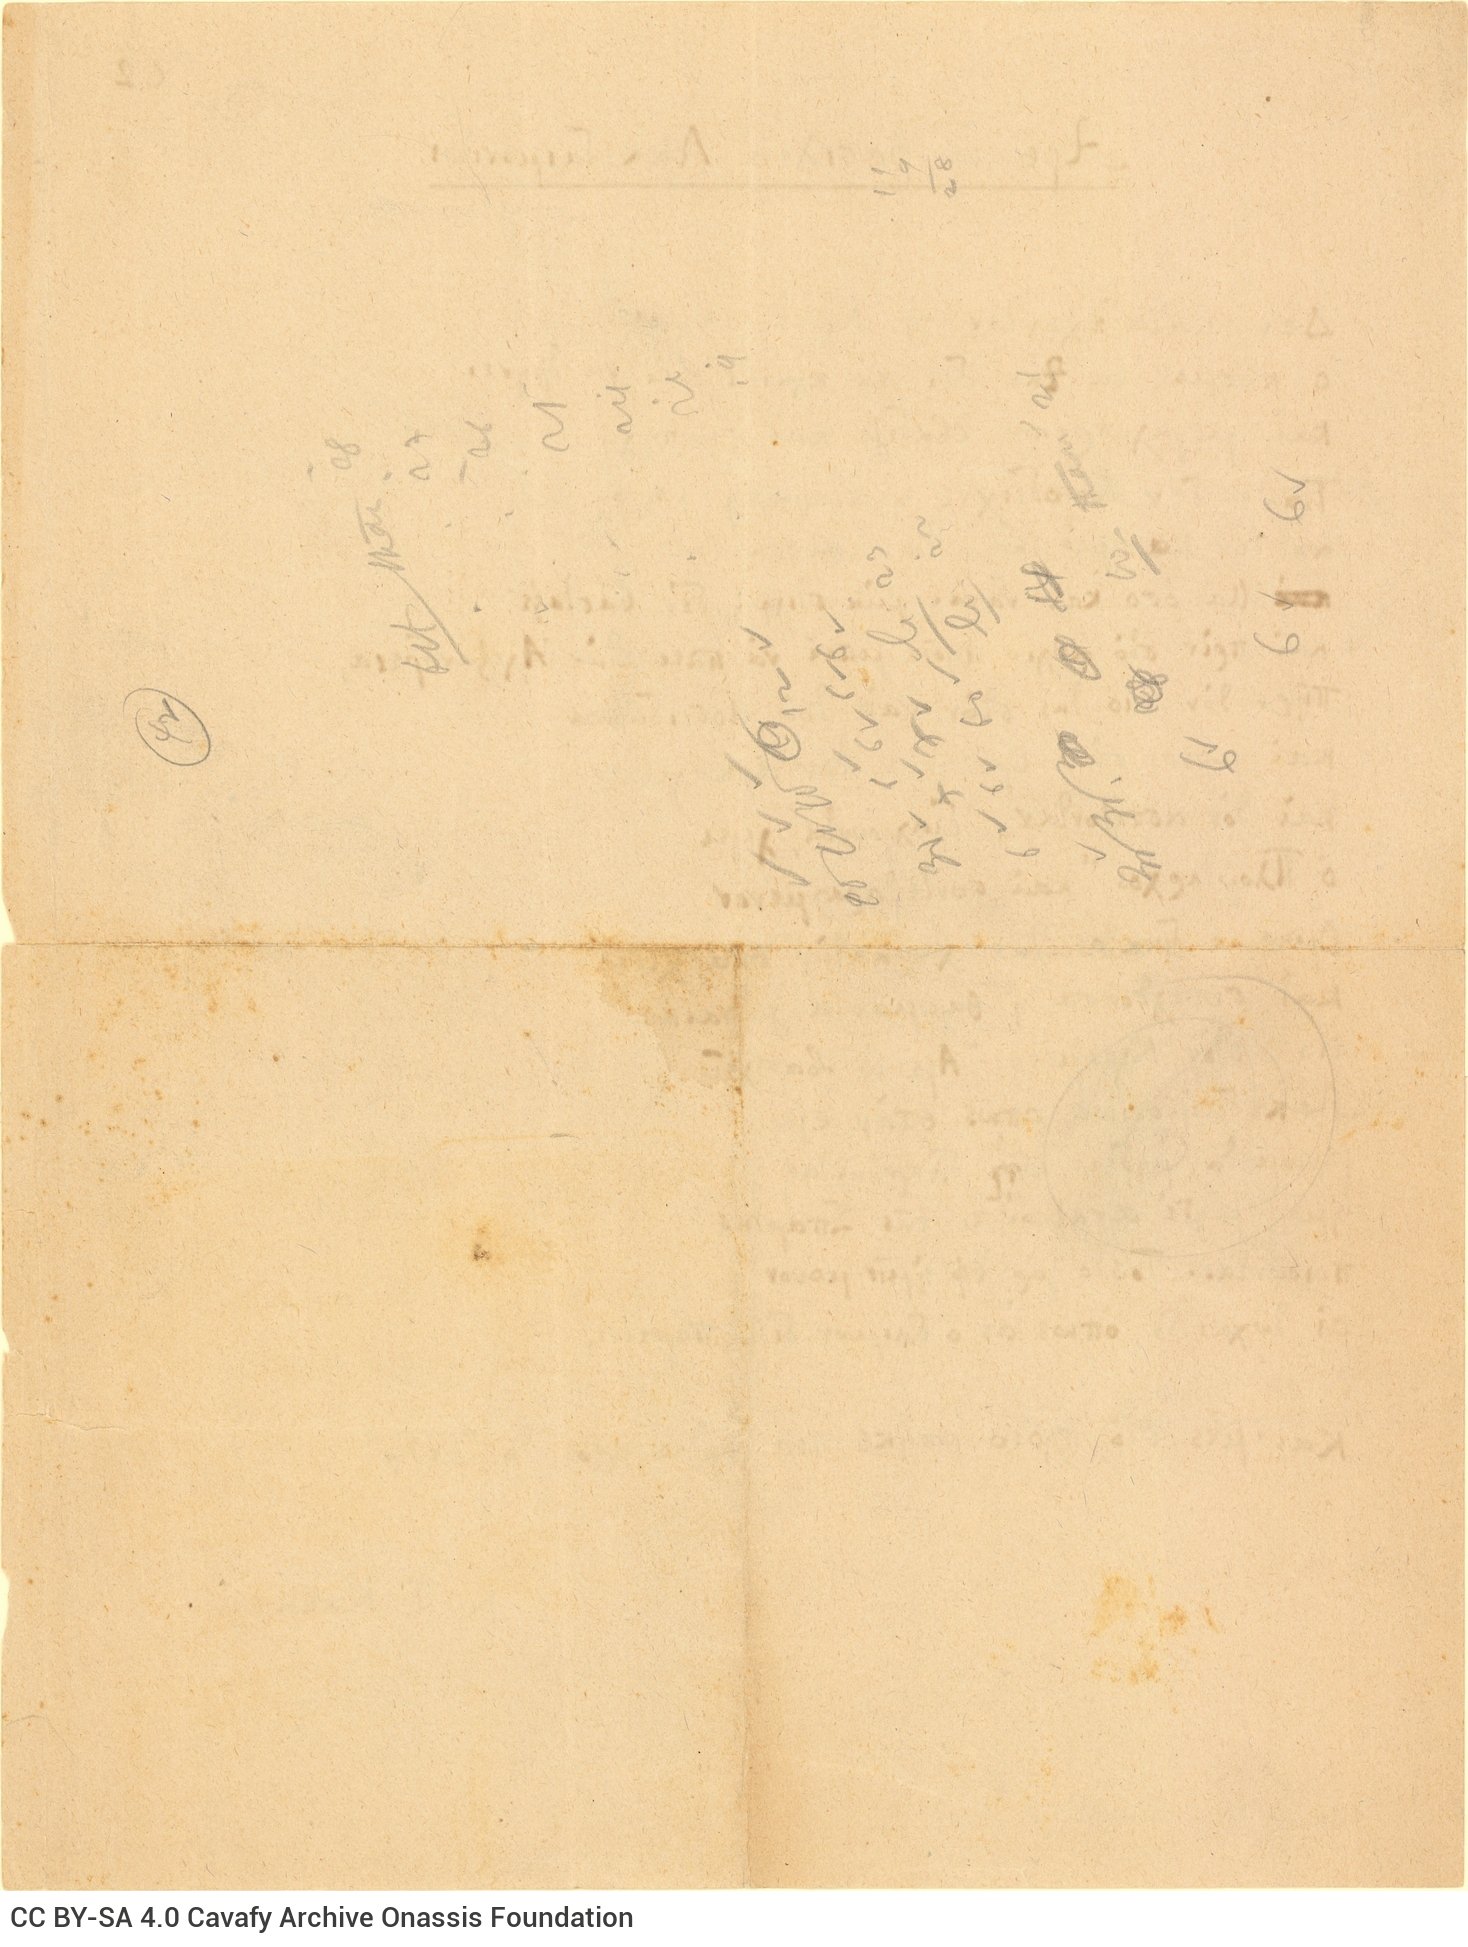 Autograph manuscript of the poem "Come Now, King of the Lacedaemonians" on one side of a sheet. Cancellations and emendati